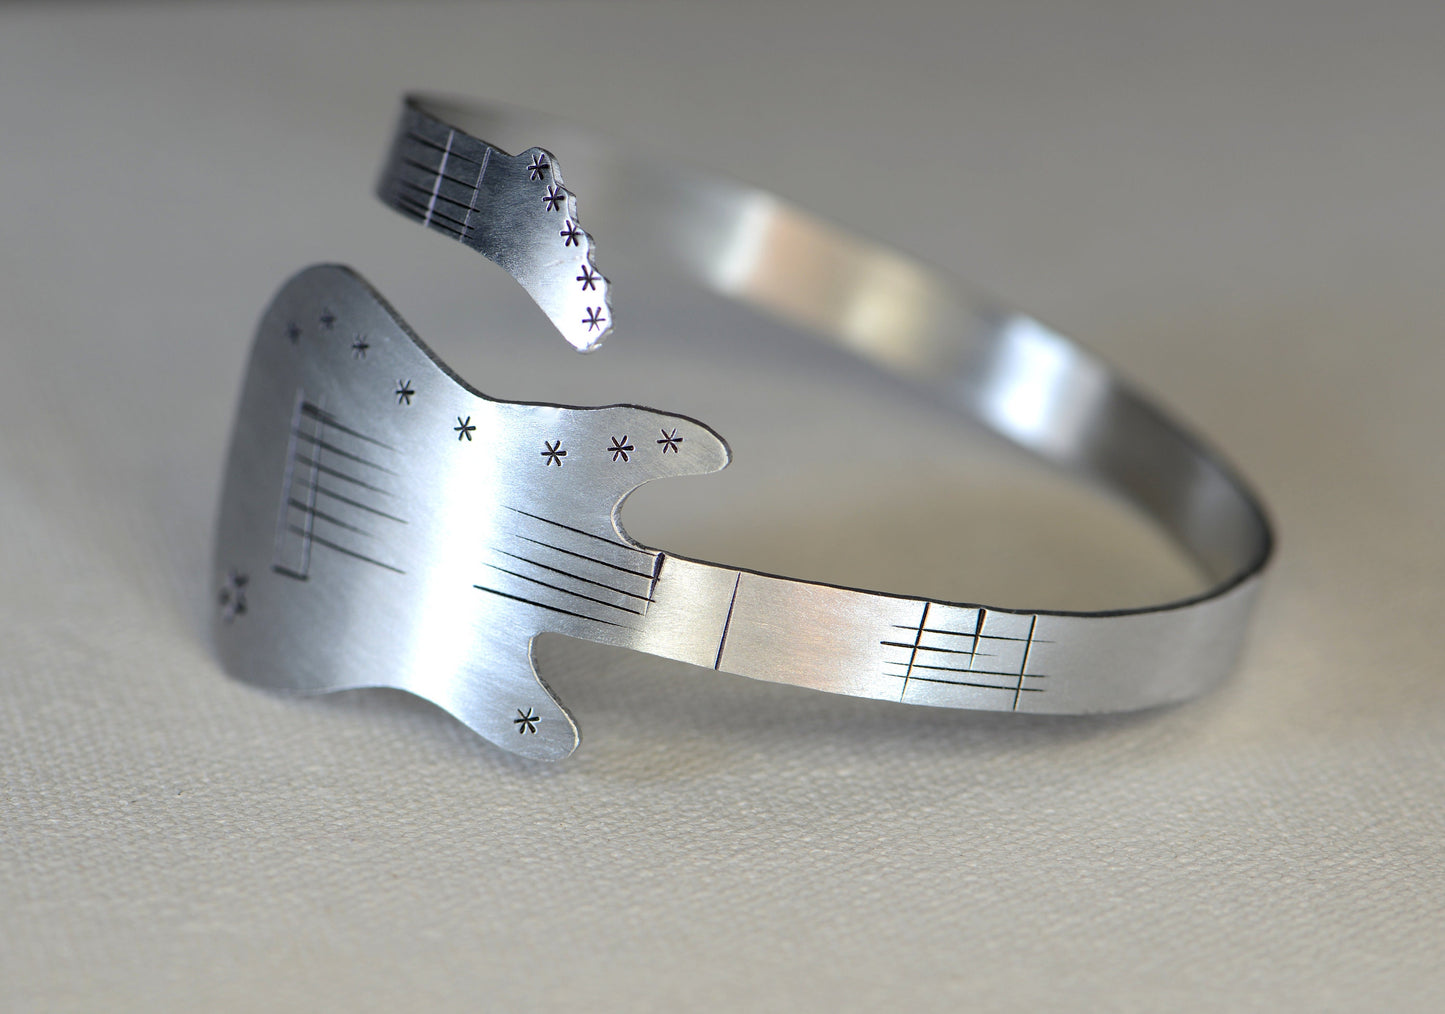 Guitar Bangle Bracelet in Aluminum or 925 Sterling Silver - Also available in copper metals